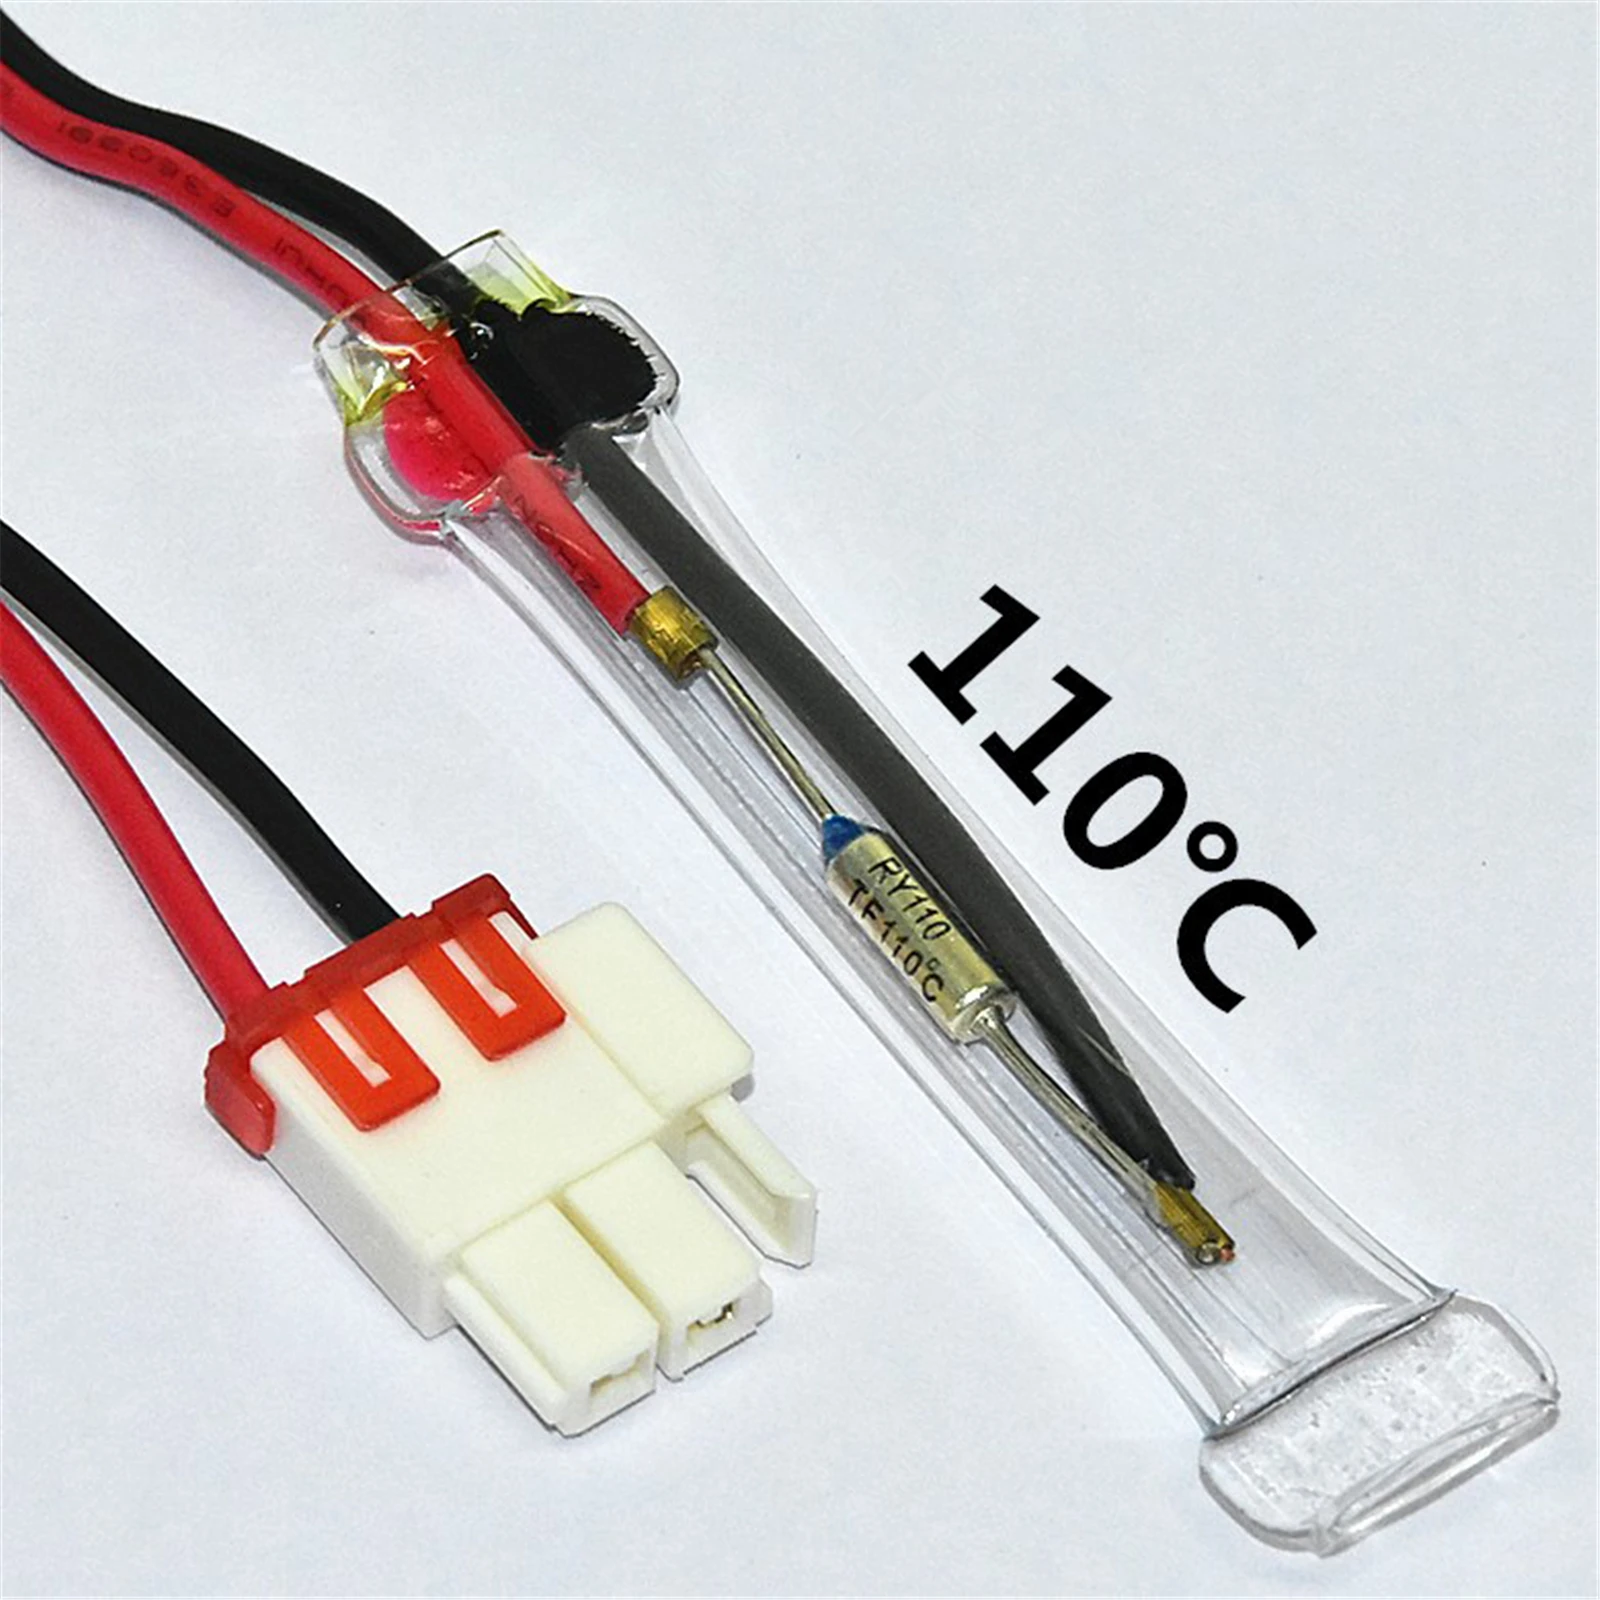 Thermal Fuse Defrost Sensor for Samsung Freezers Fridge Fuse Tube Accessories